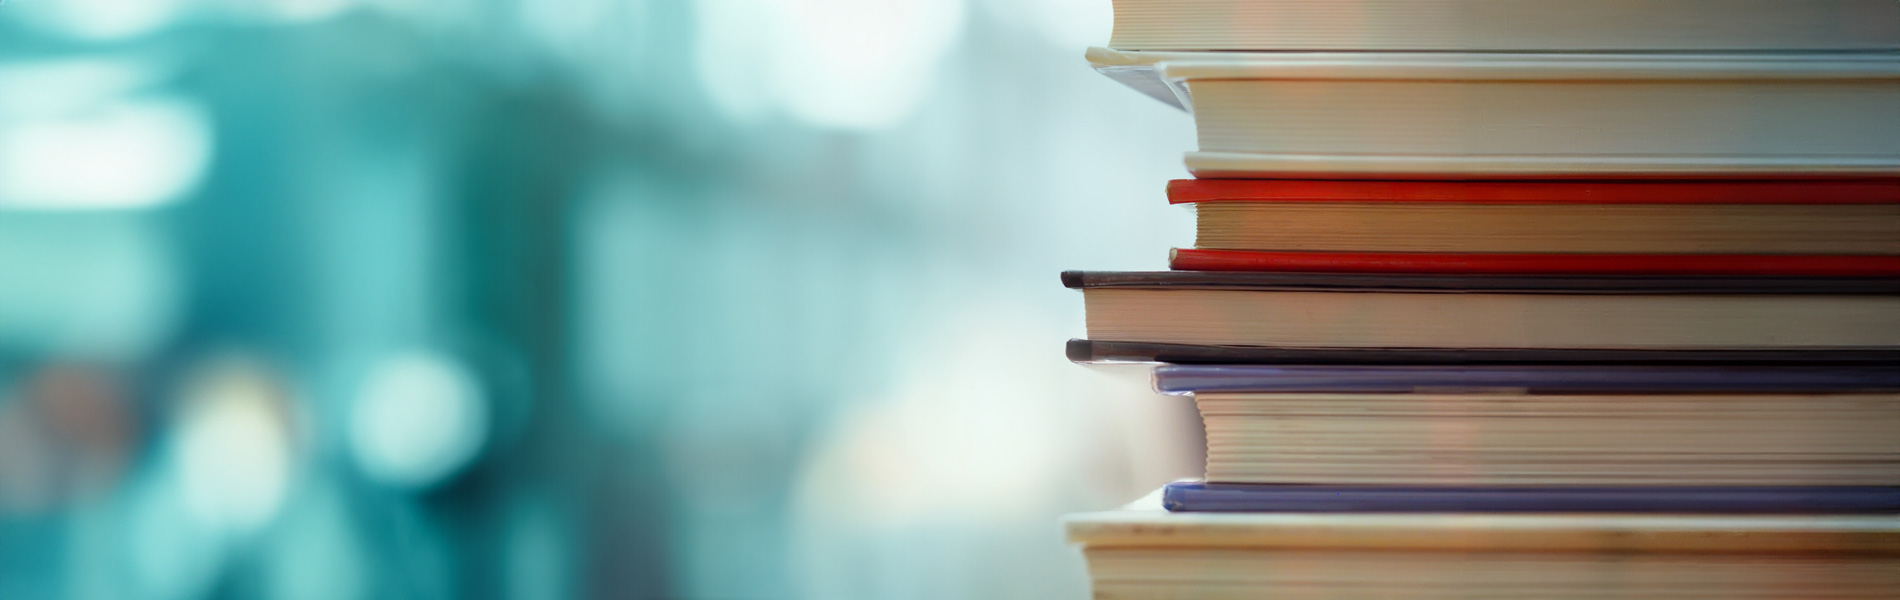 Stacked books with blurred blue background symbol of education